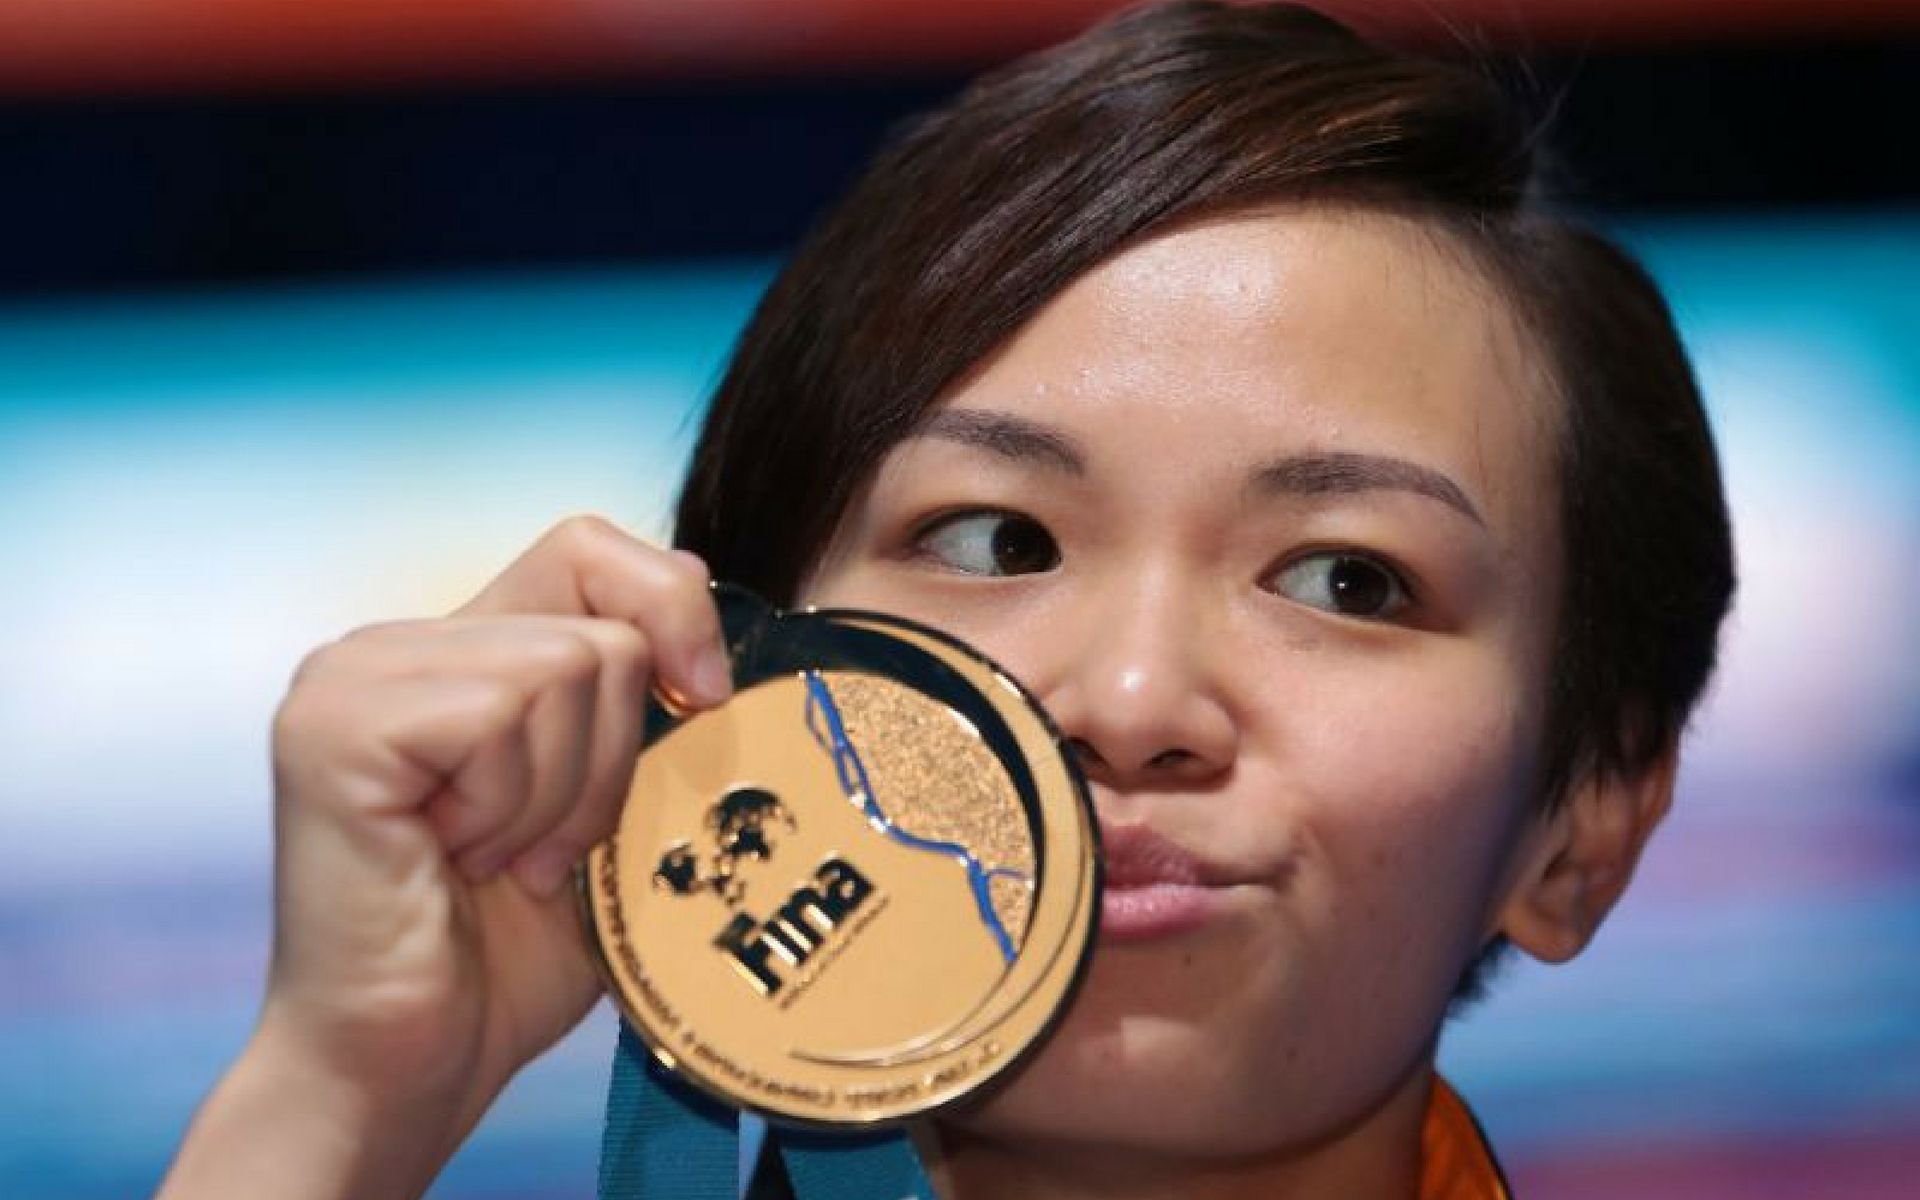 Jun hoong and her world champion medal